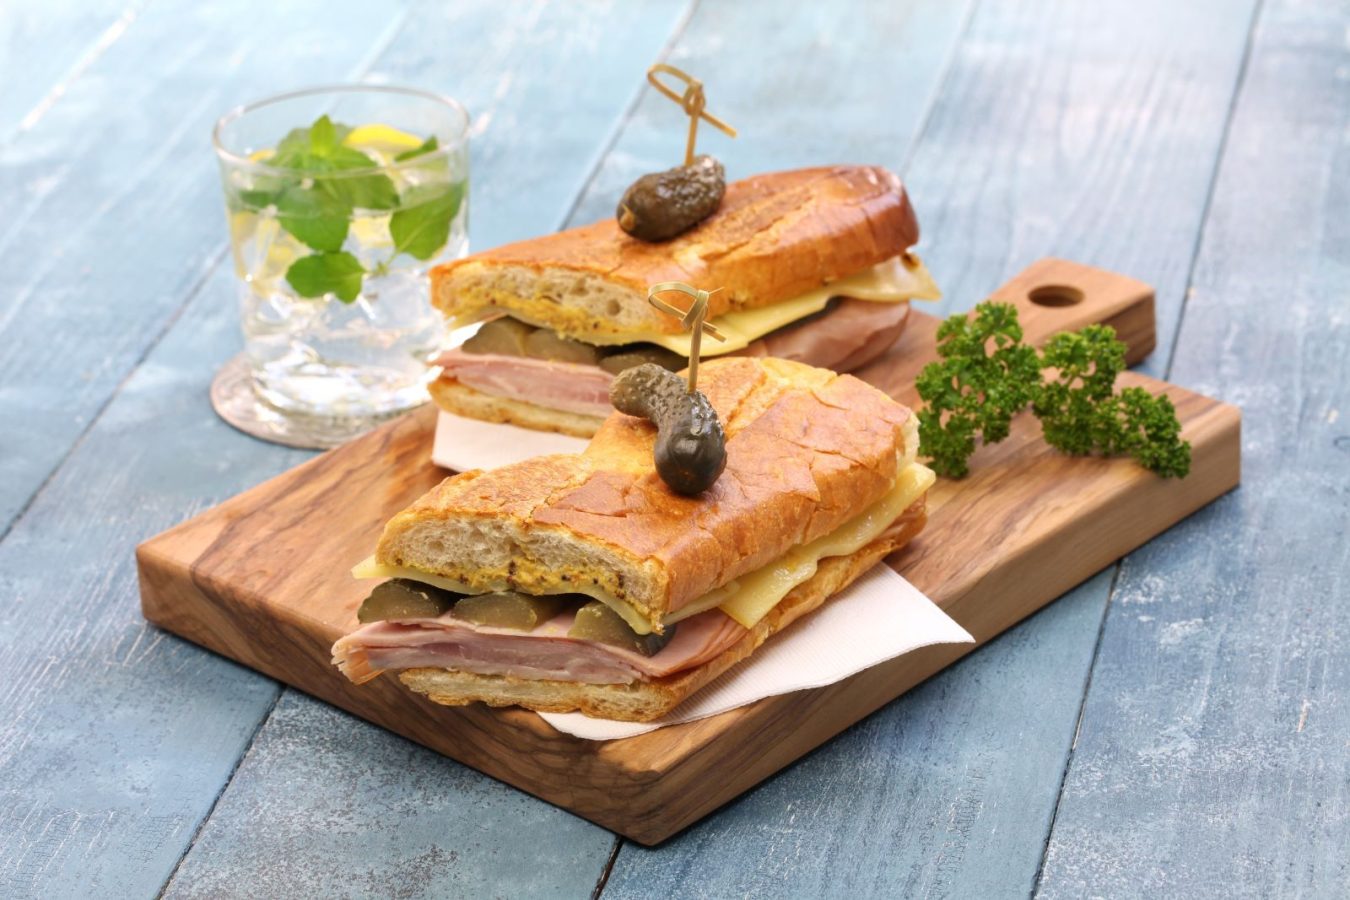 Cuban sandwich served with greens and pickles on a charcuterie board with a refreshing cocktail on the side